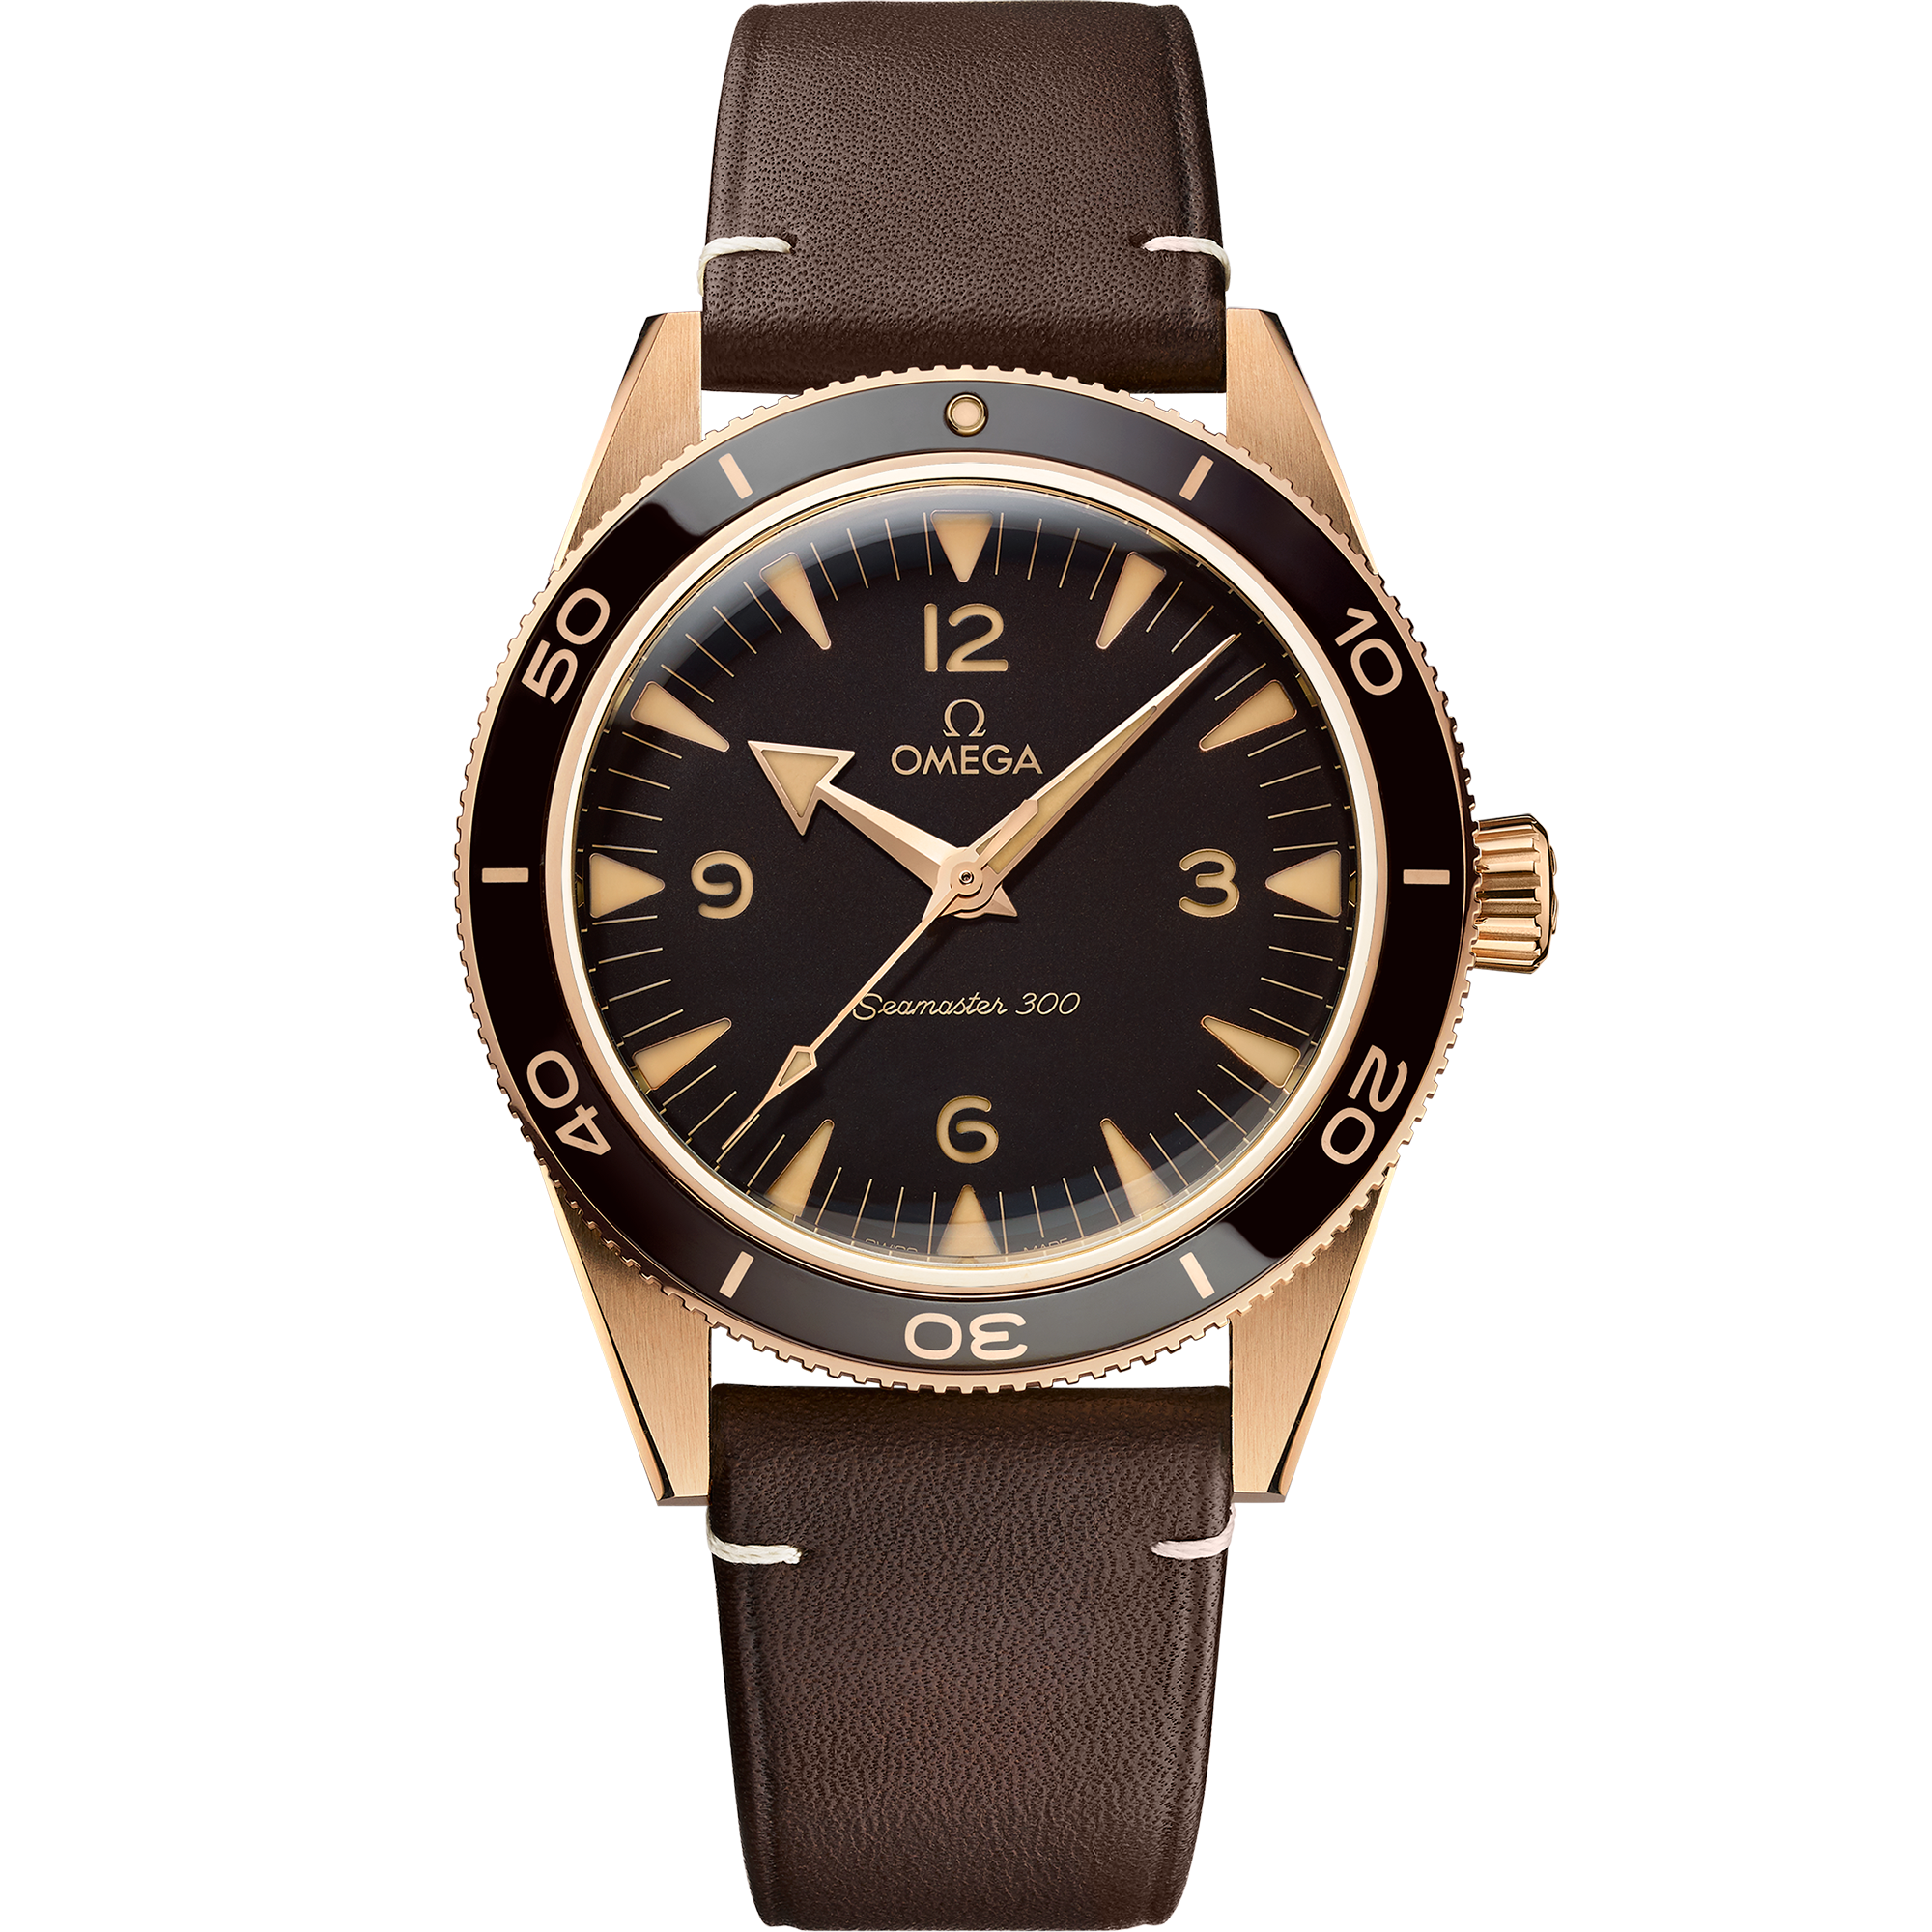 Seamaster 300 41 mm, Bronze gold on leather strap - 234.92.41.21.10.001